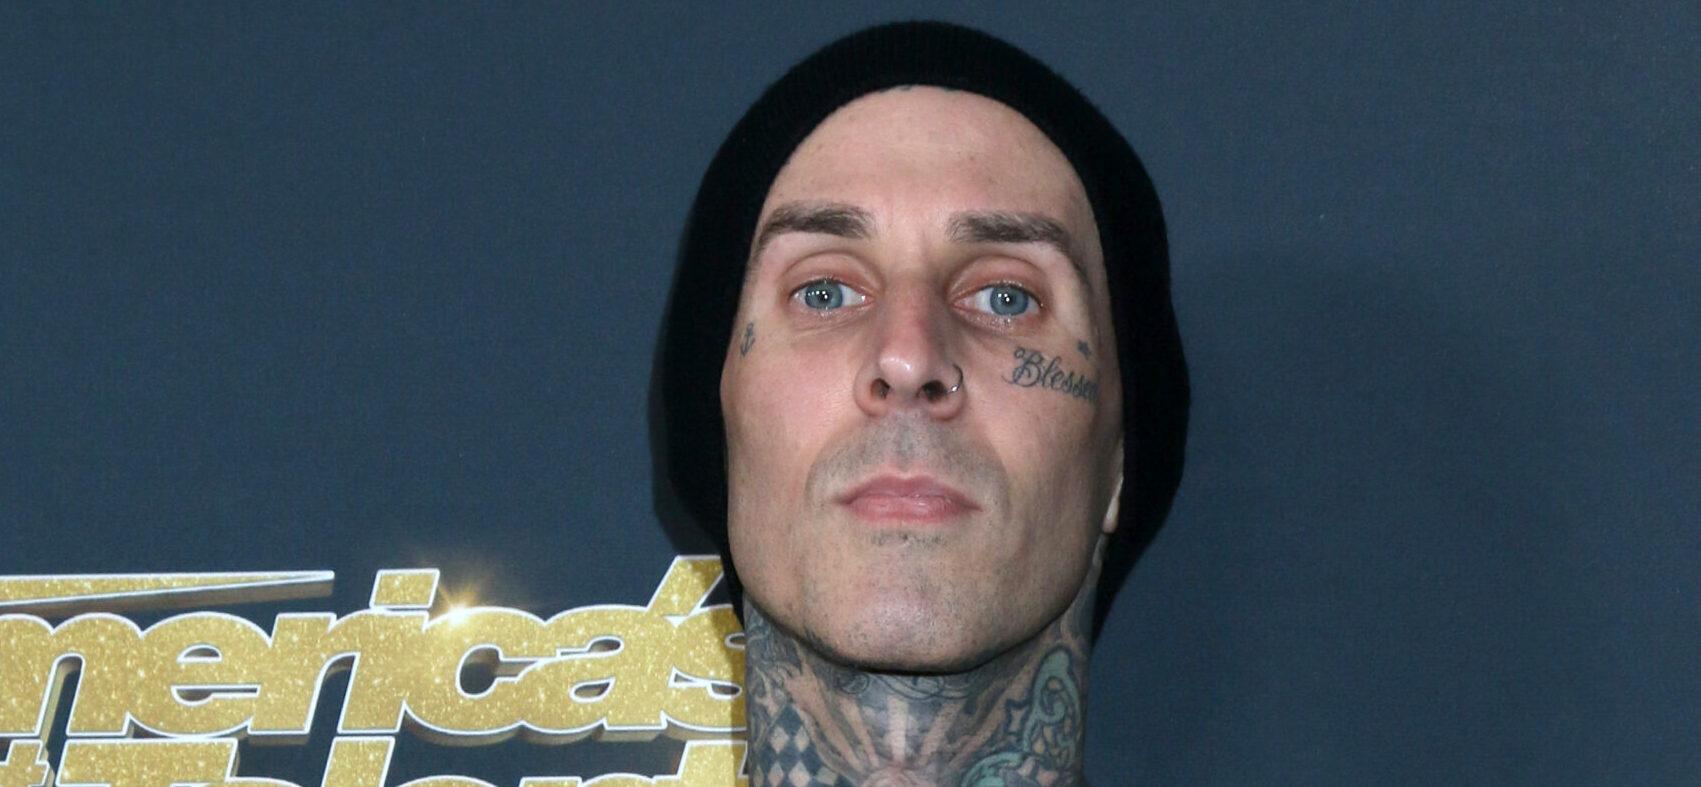 Travis Barker at "America's Got Talent - The Champions" Season 2 Finale Guest Performers Photo Call - Pasadena